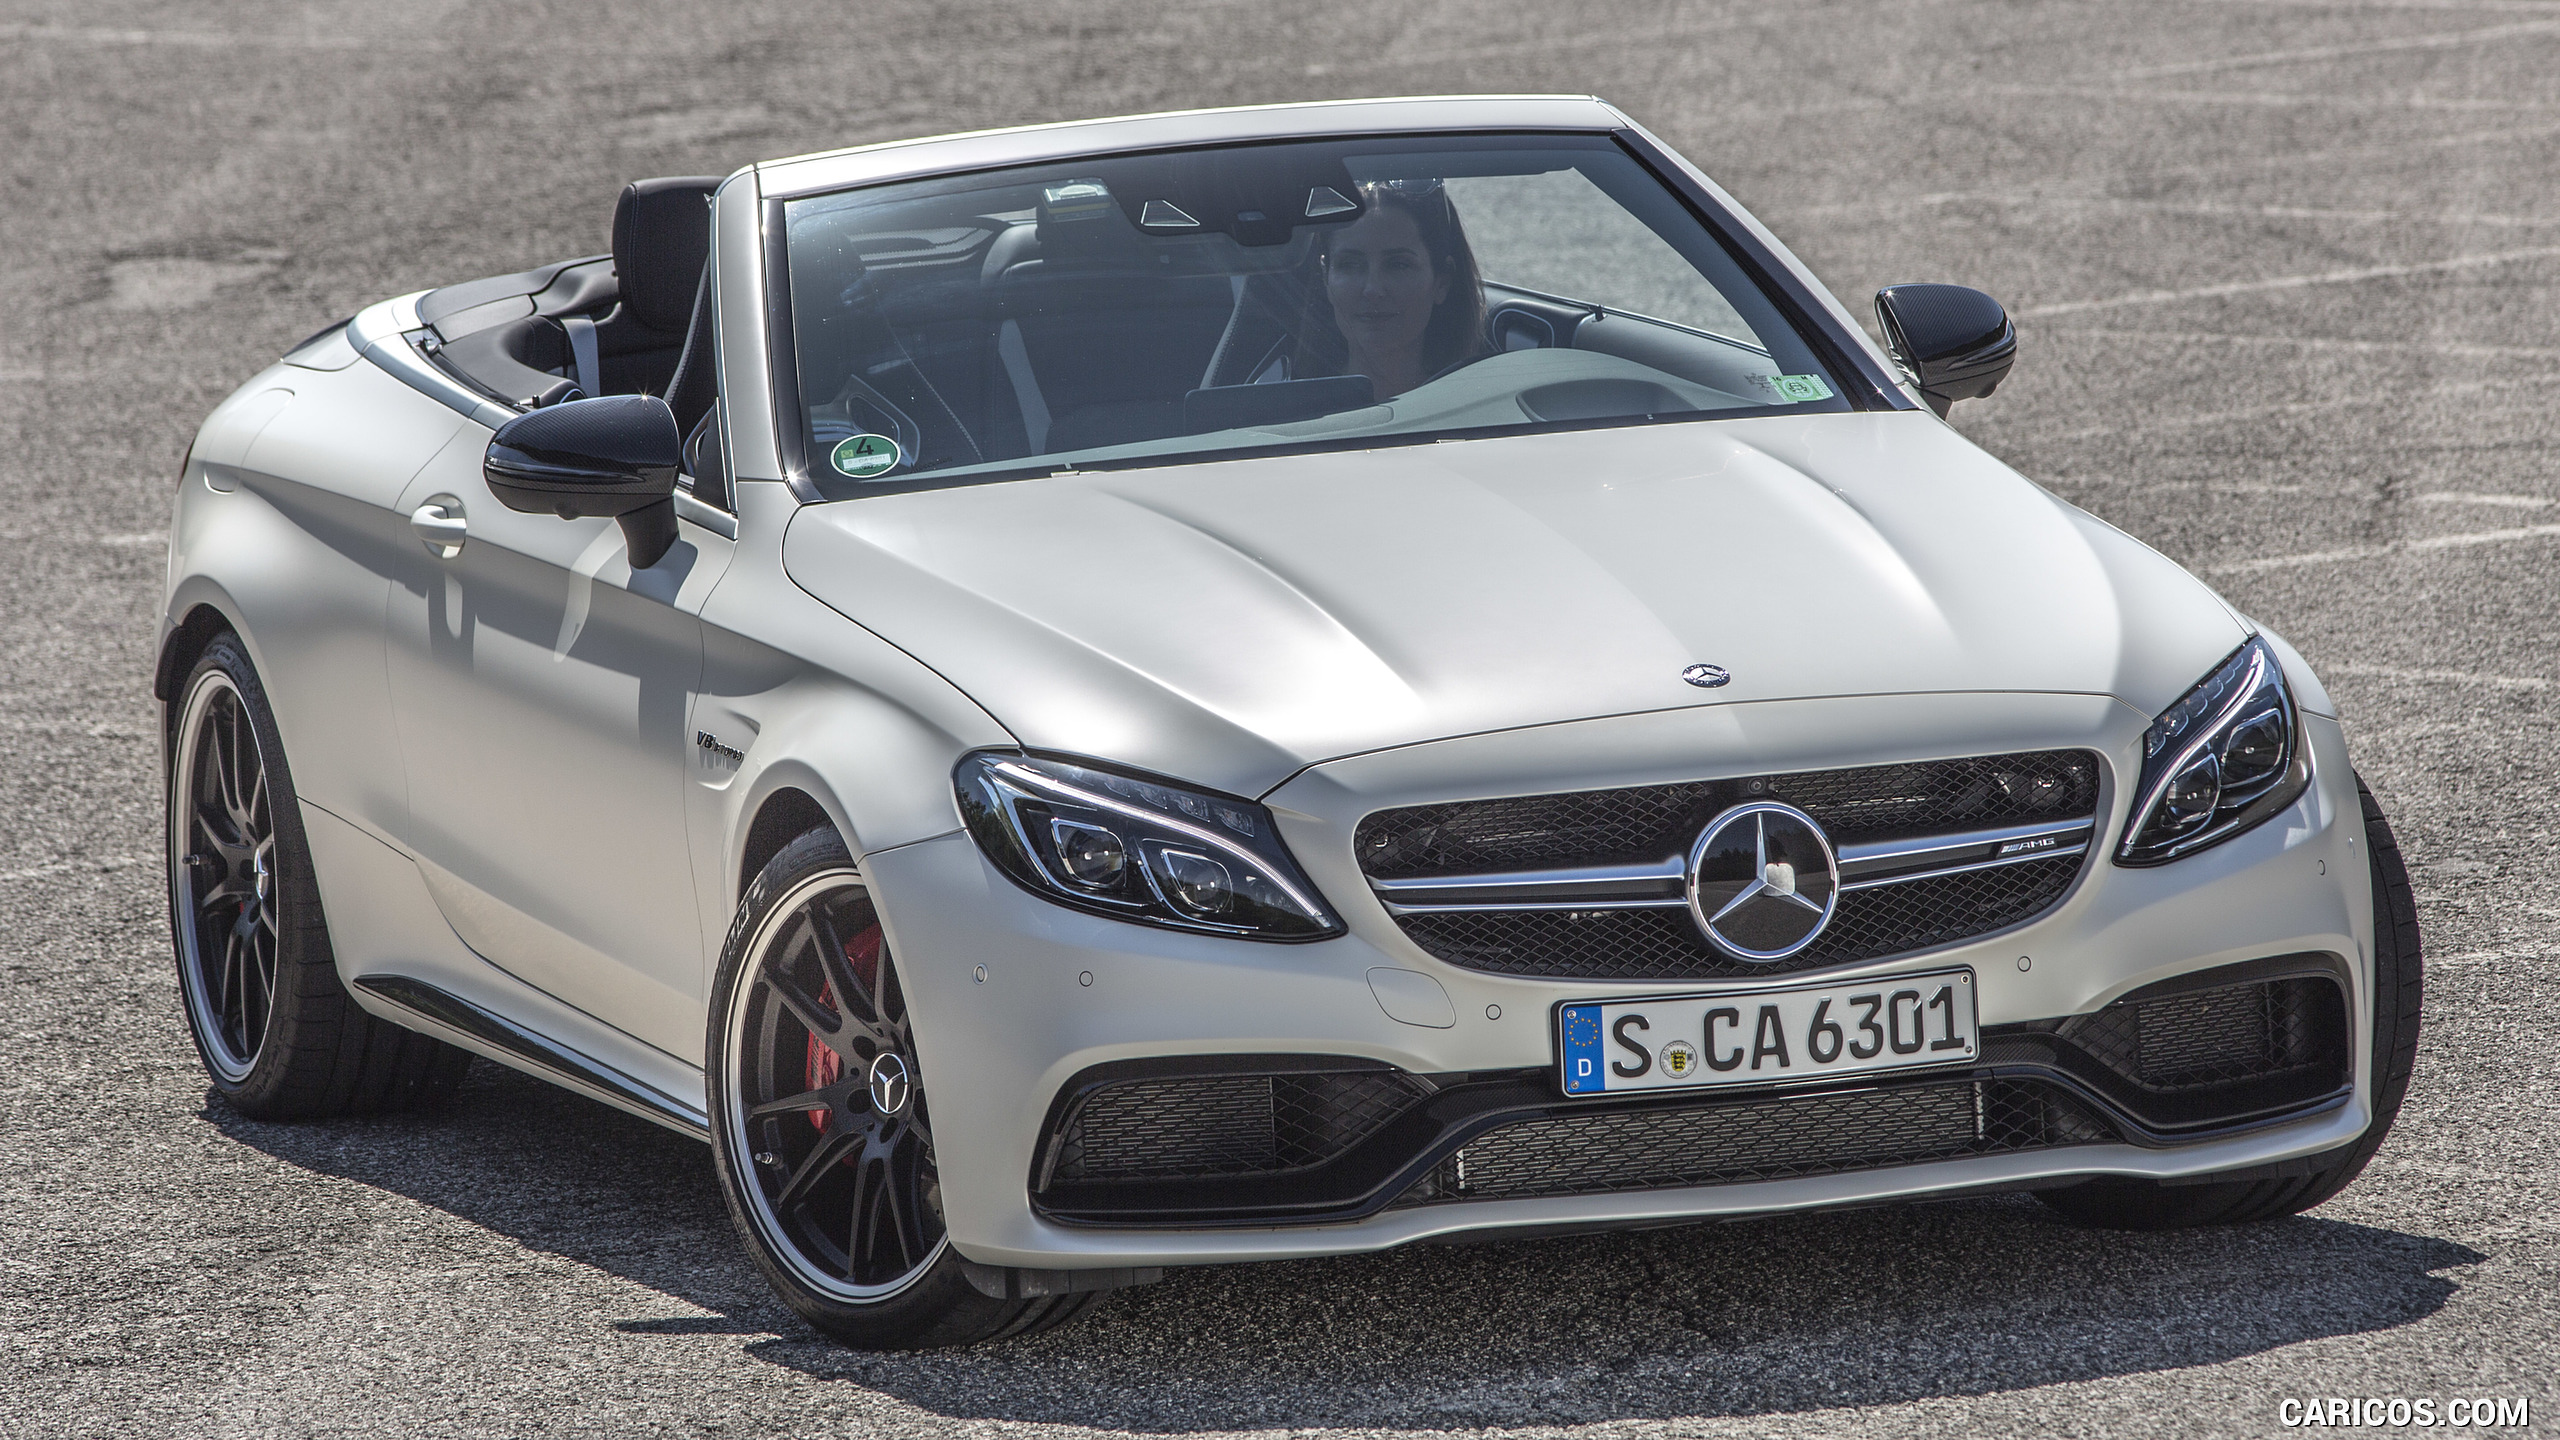 2017 Mercedes-AMG C63 S Cabriolet - Front, #130 of 222